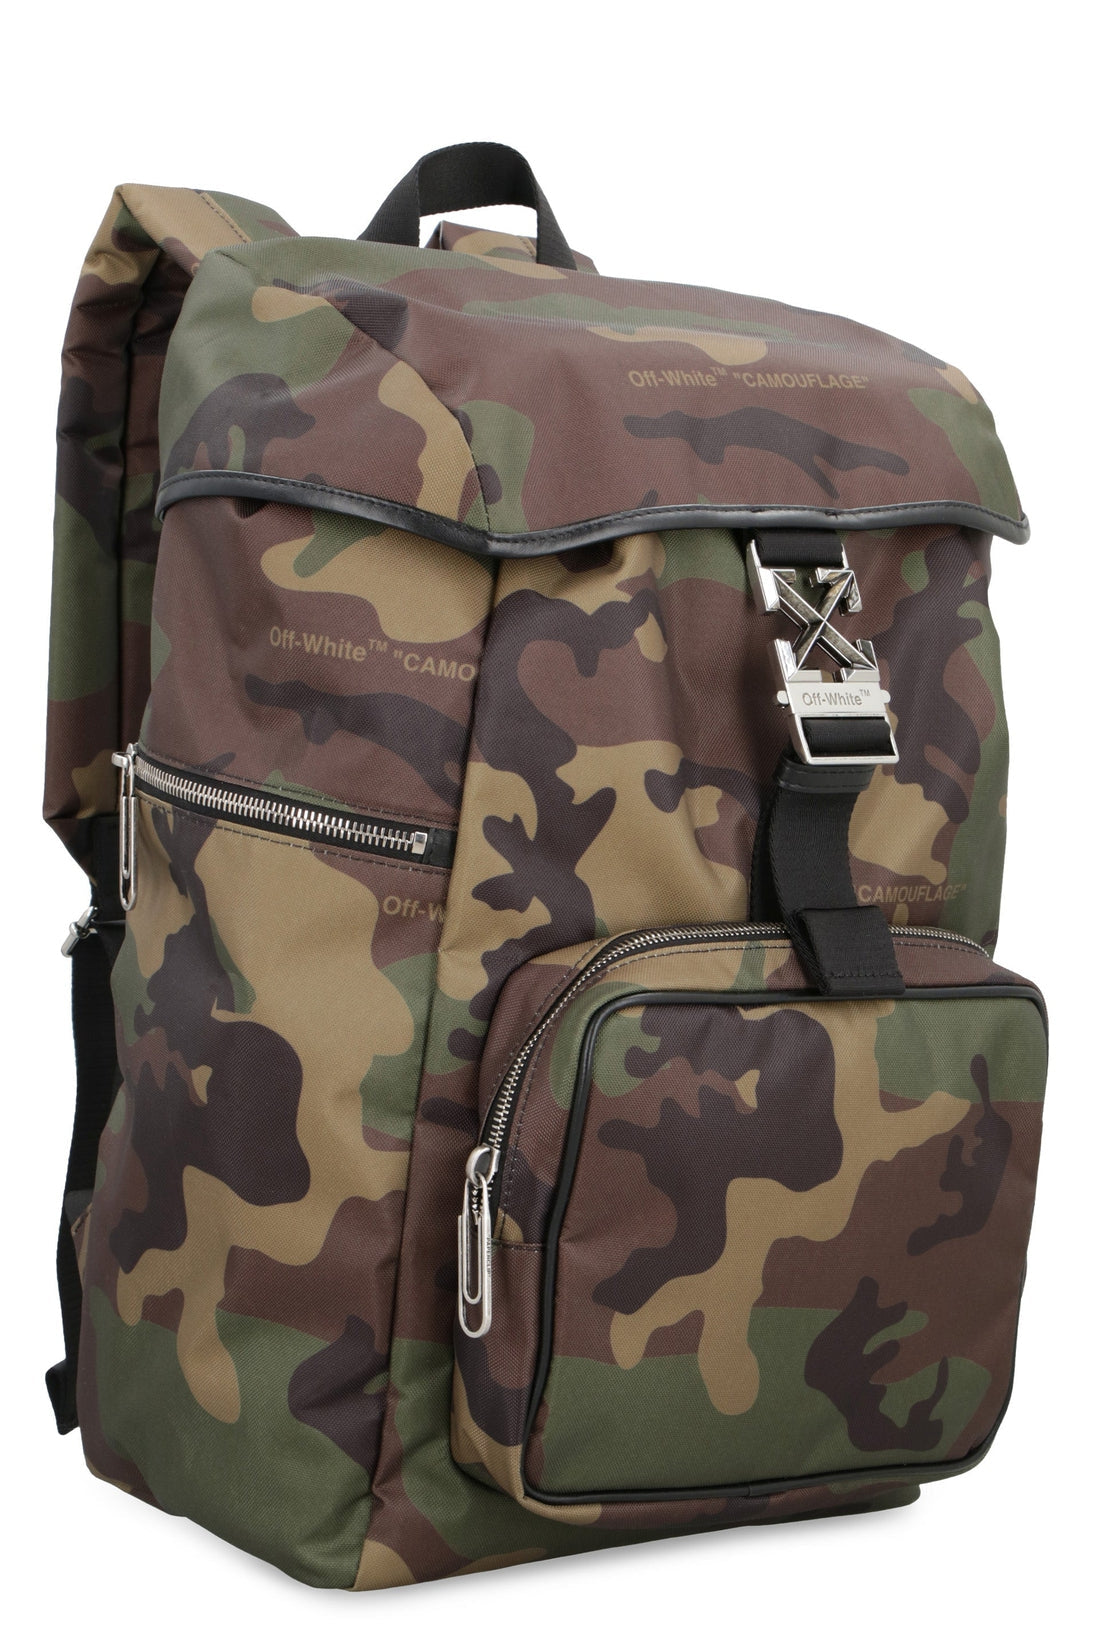 Off-White-OUTLET-SALE-Arrow Tuc coated canvas backpack-ARCHIVIST